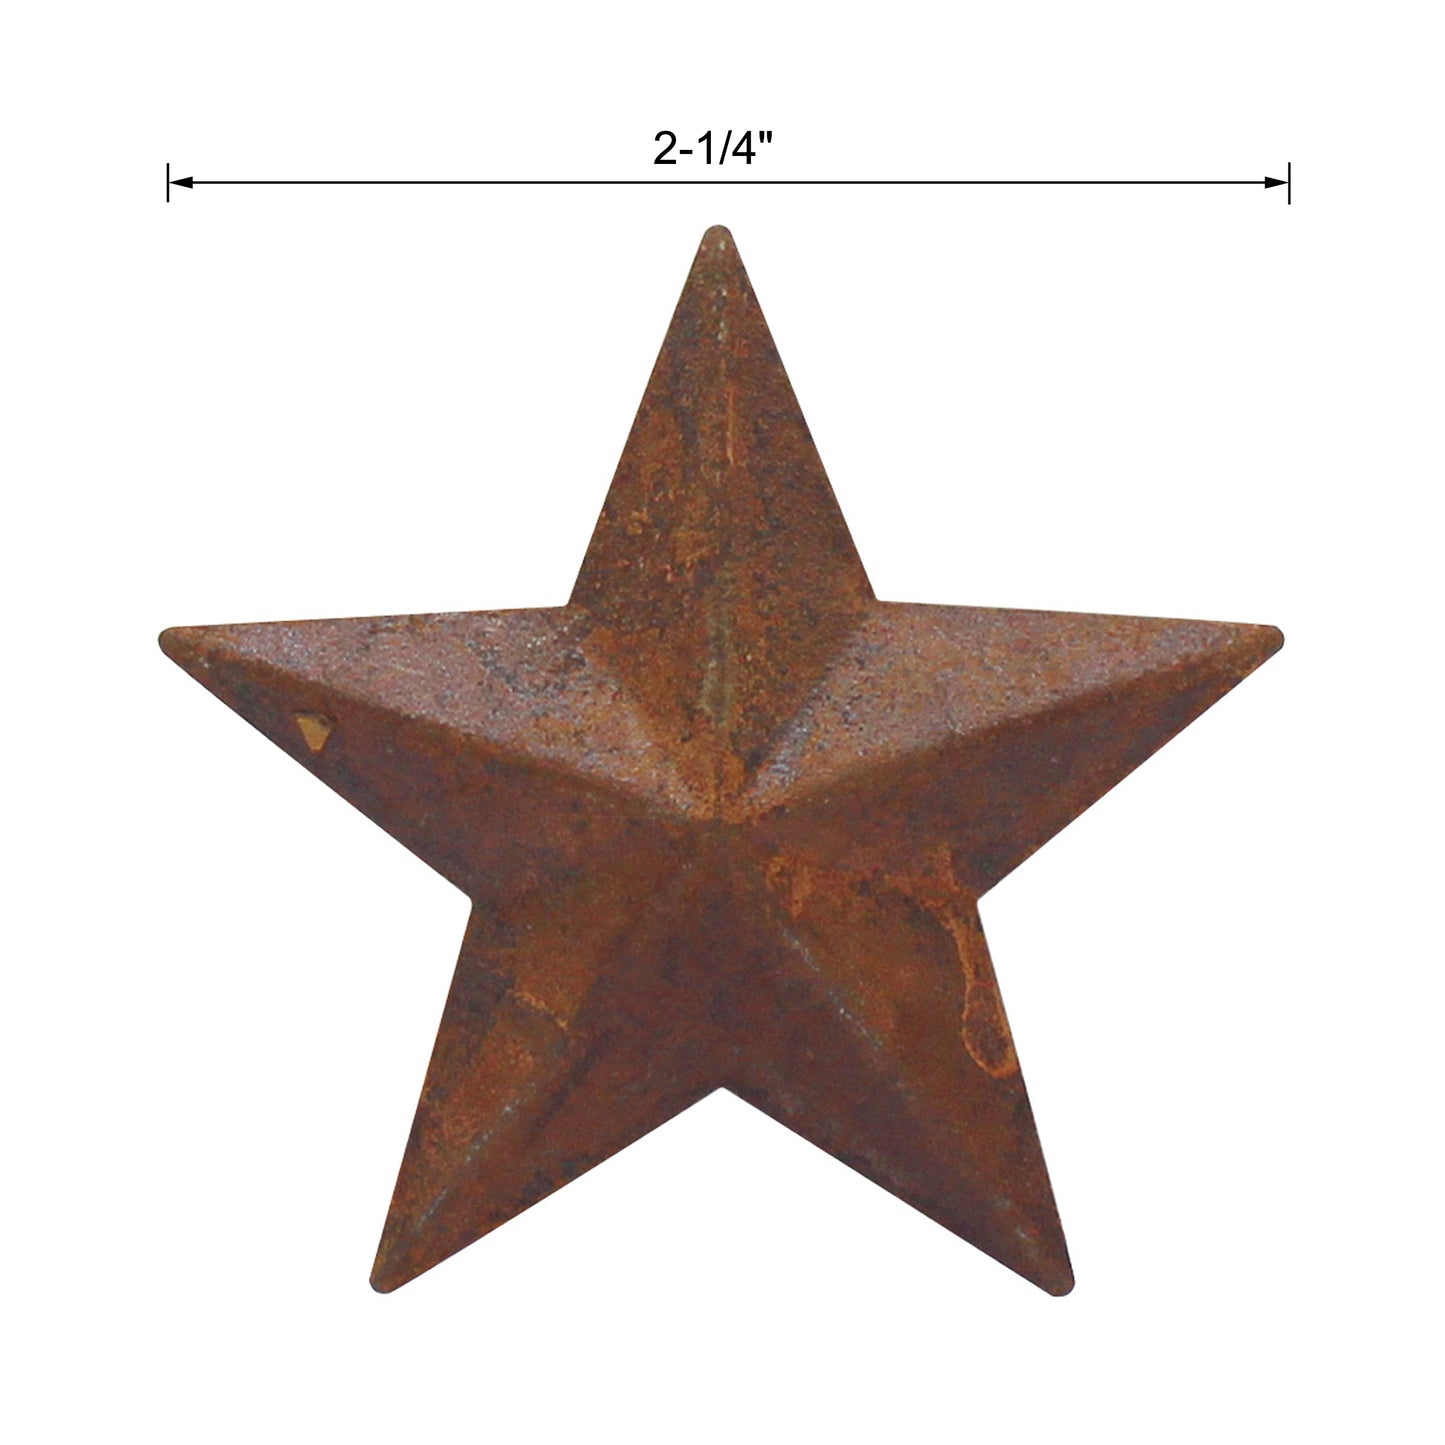 CVHOMEDECO. Primitive Rustic Country Décor. Rusty Small Metal Barn Star Home Decorative Accents, 2.25 Inch, Set of 24